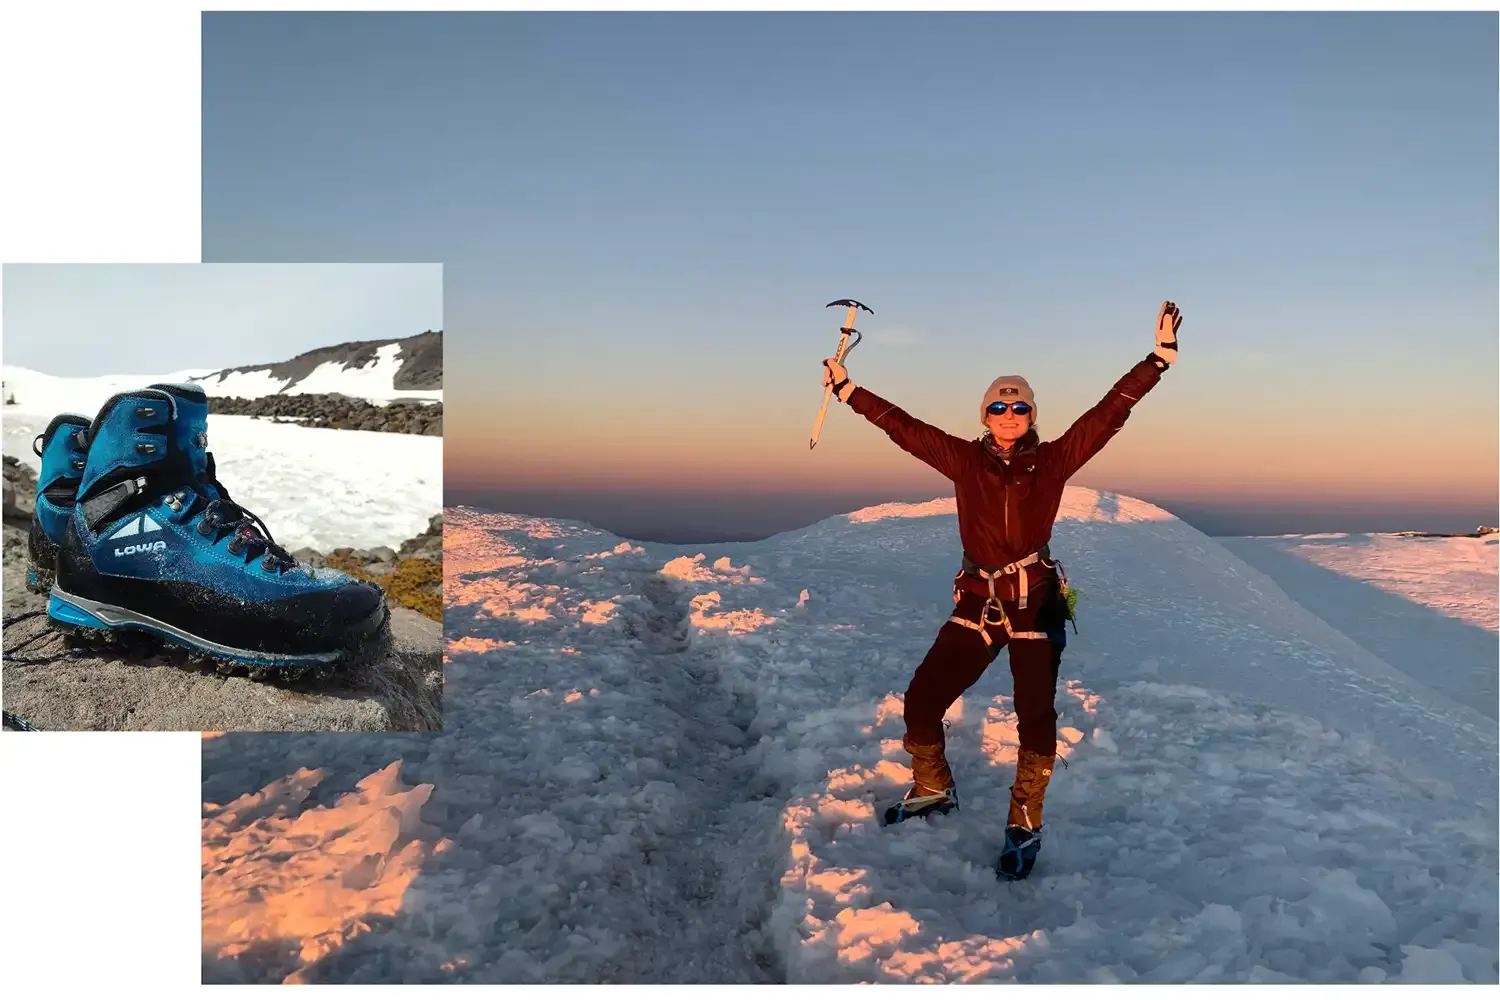 two photos: left of Alpine Expert GTX womens and right of angie at sunset atop a summit hands in the air